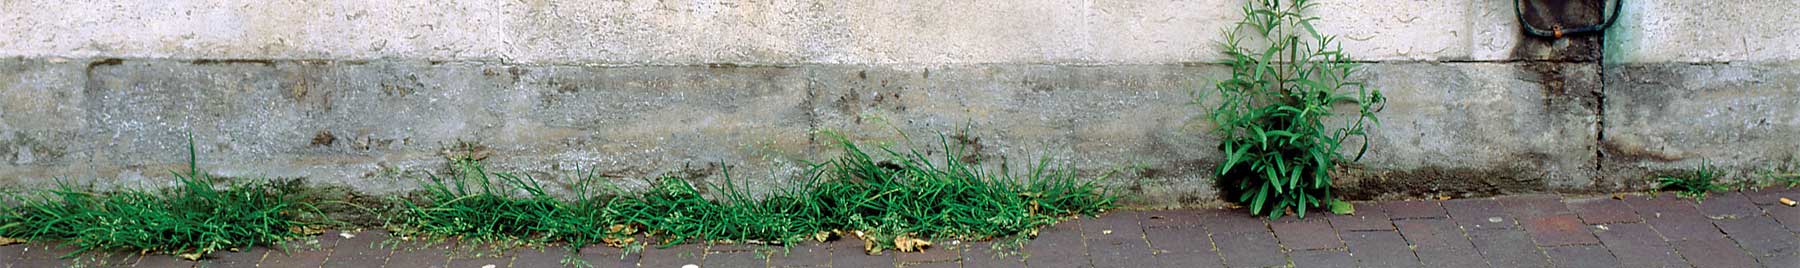 Grass along the side of a bricked sidewalk.